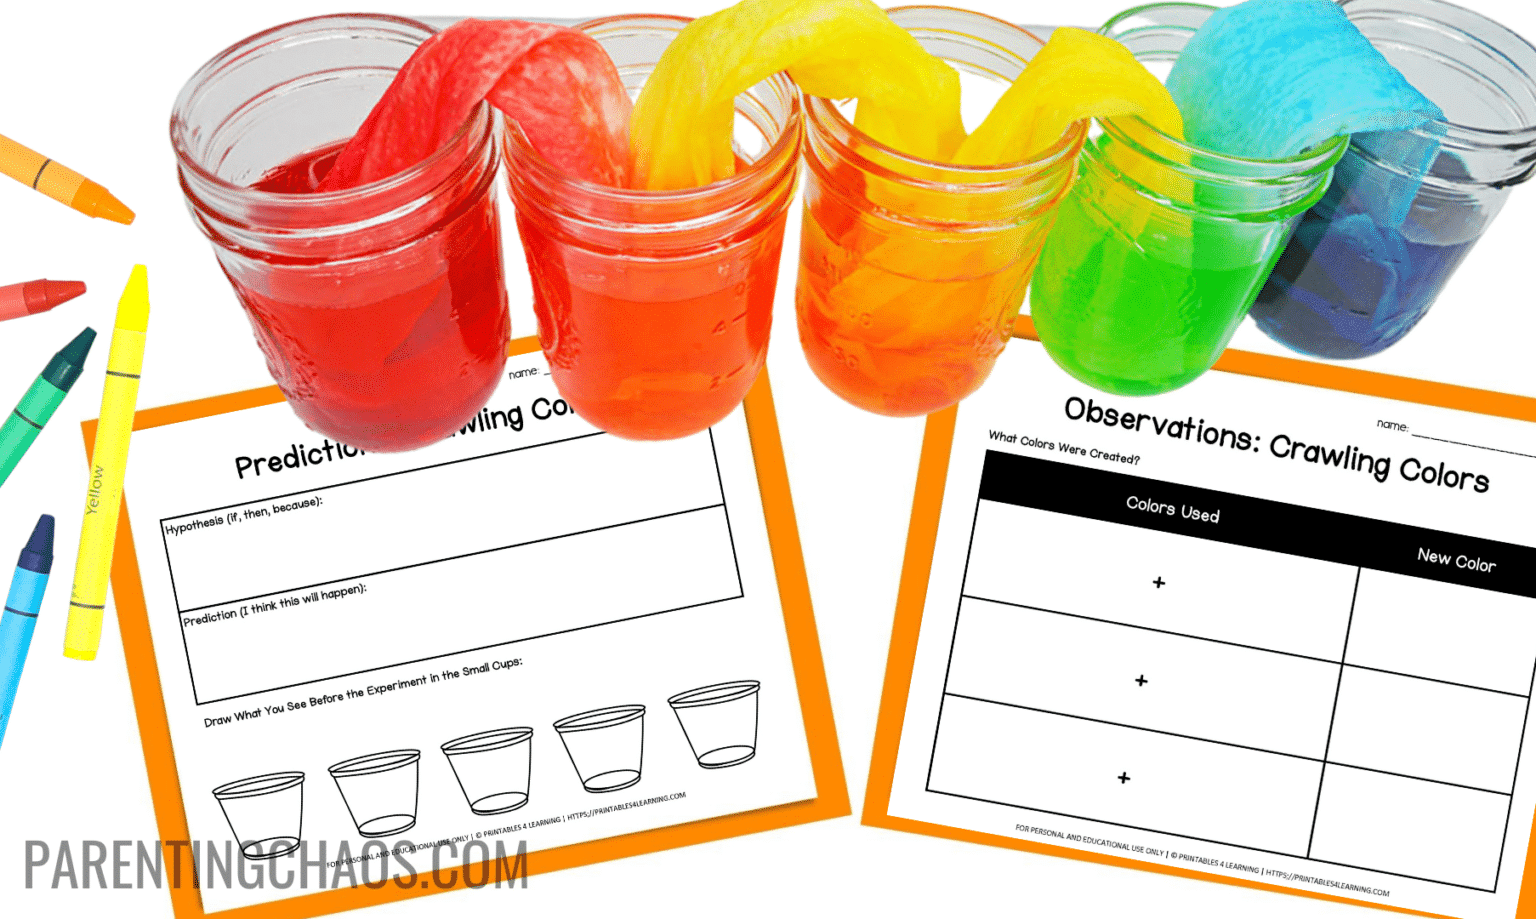 Educational activities for kids involving jars, colored liquids, and crayons.